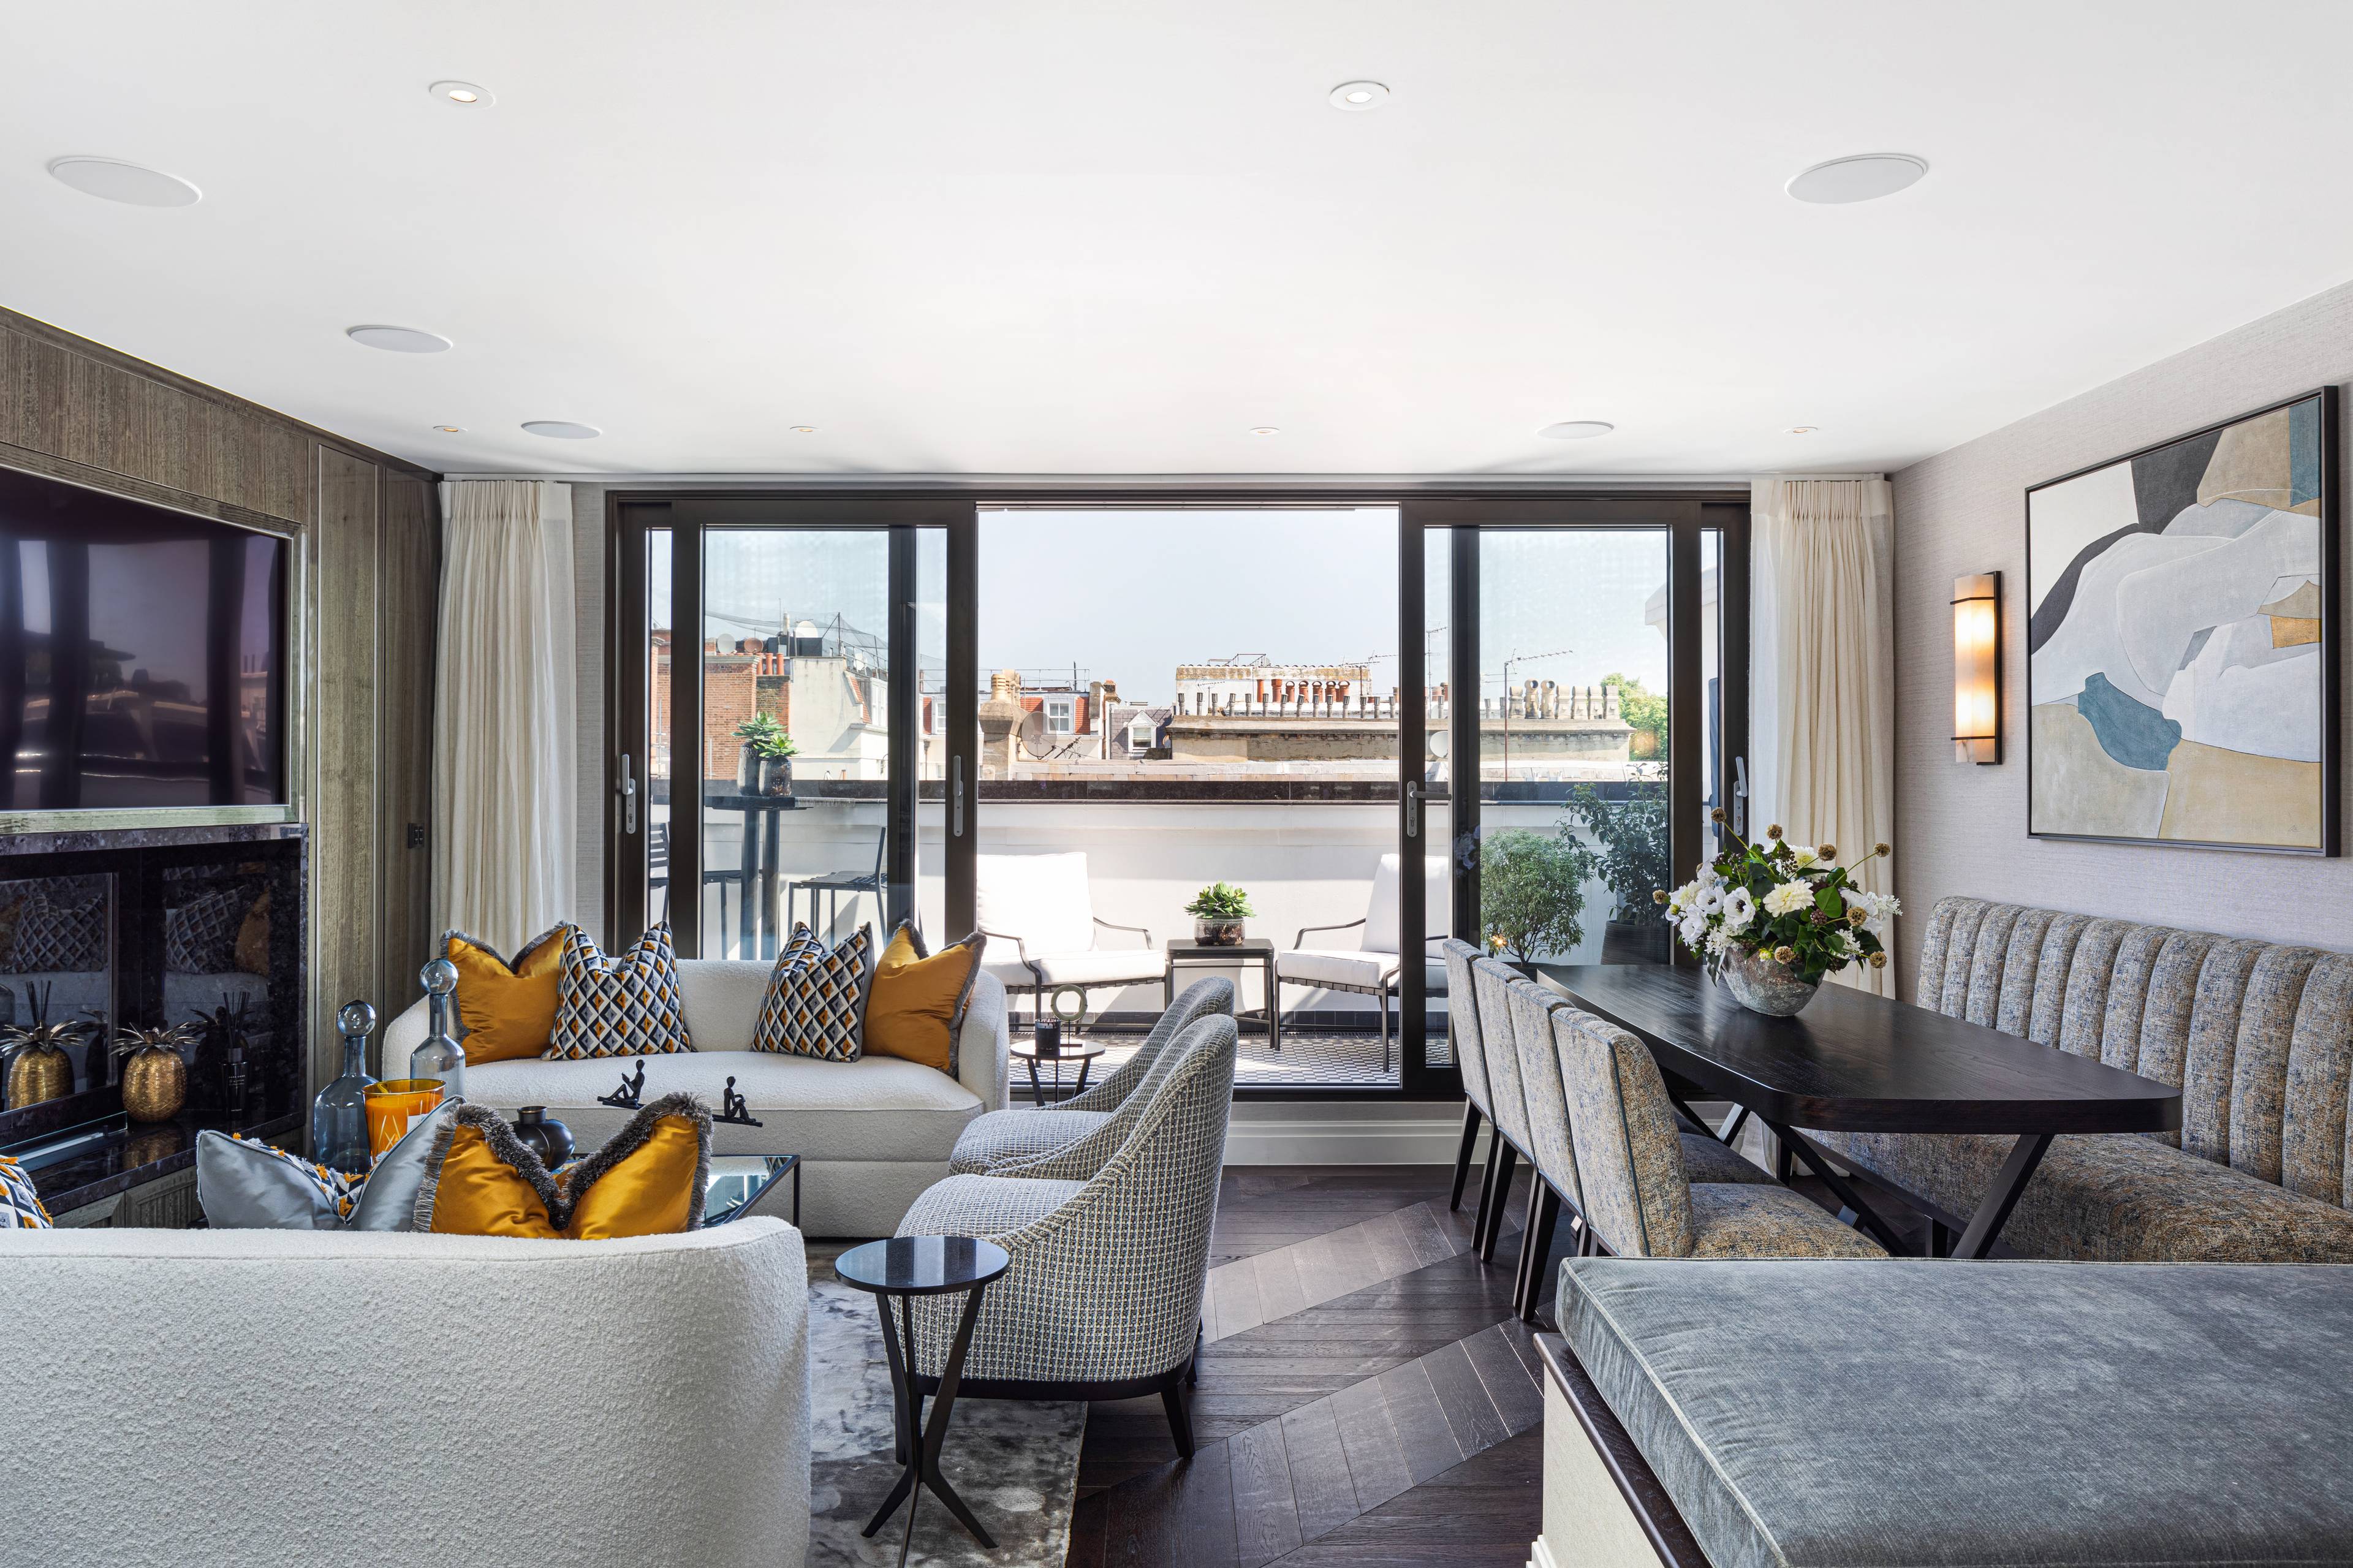 The West Penthouse at Prince of Wales Terrace is a luxurious 1,299 sq. ft, three-bedroom duplex apartment with superb views over Hyde Park and London.